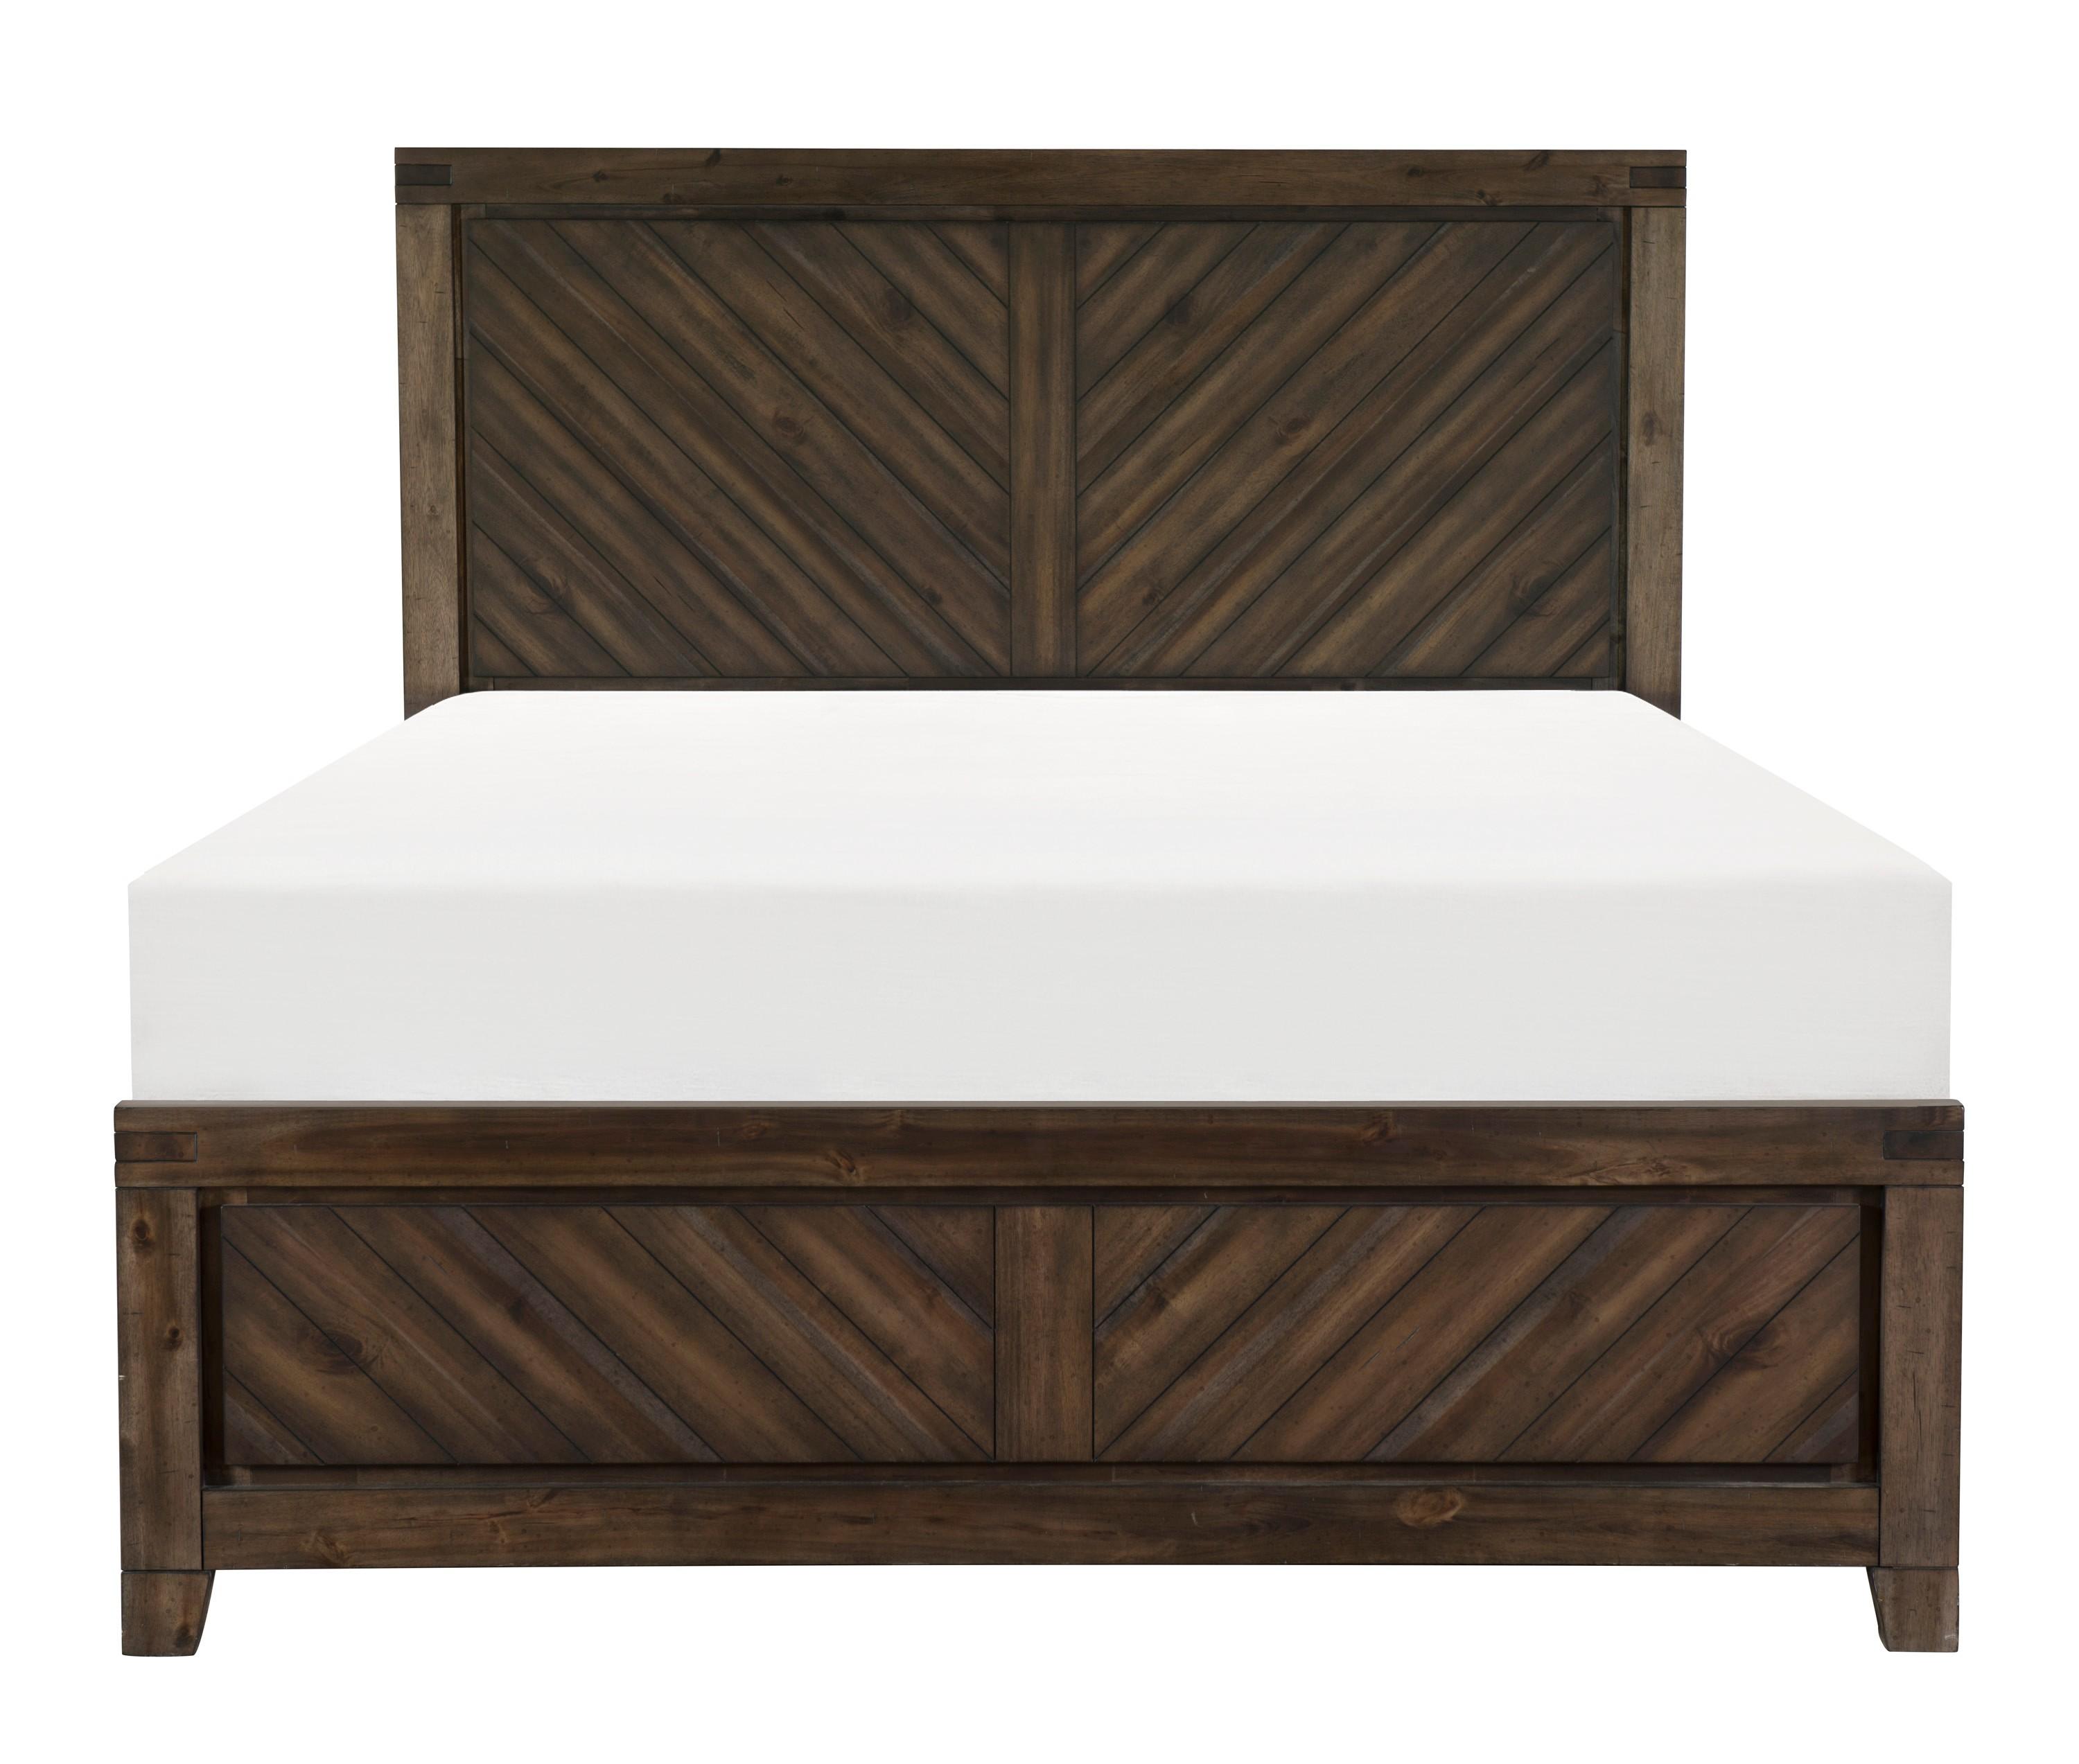 

    
Rustic Distressed Espresso Wood Queen Bed Homelegance 1648-1* Parnell
